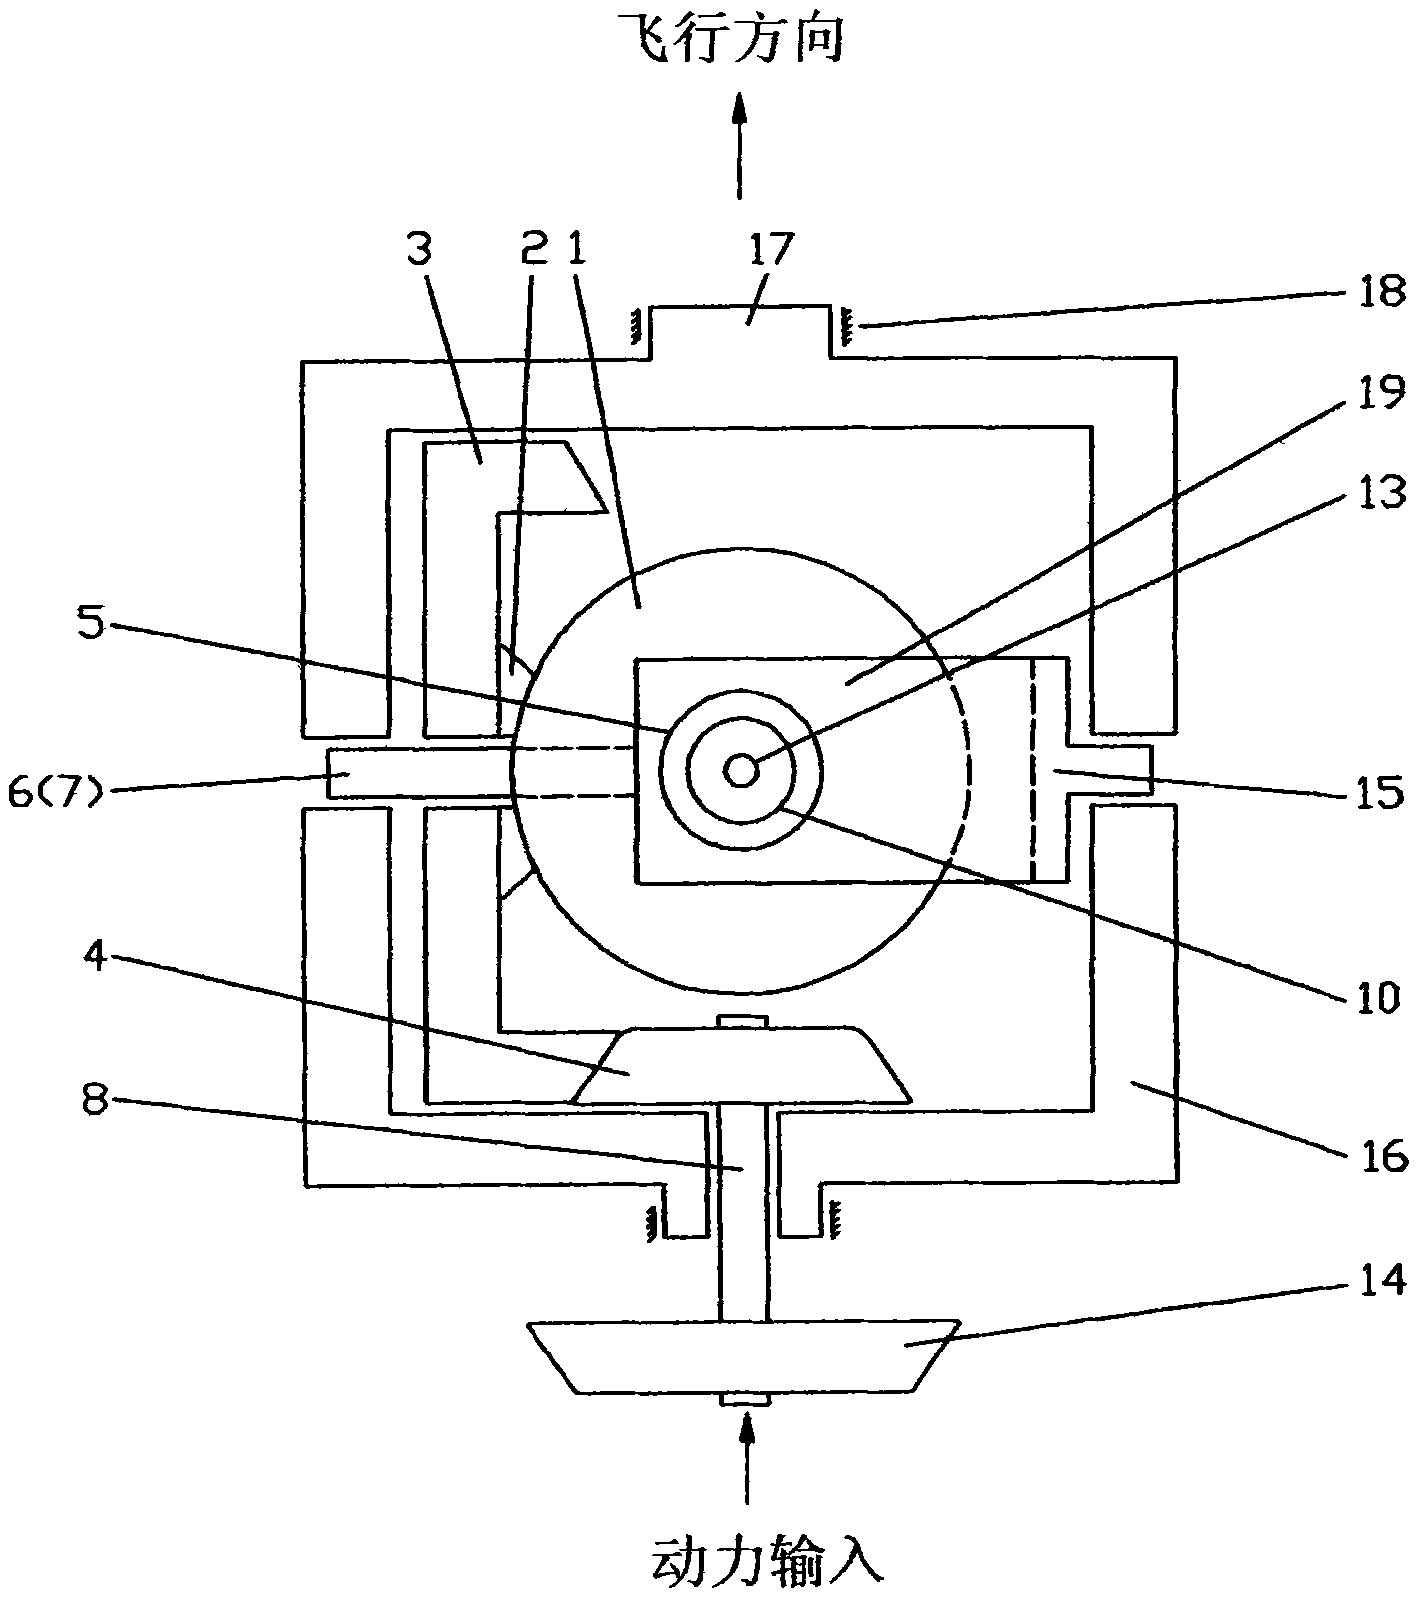 Direct inclination control rotor helicopter